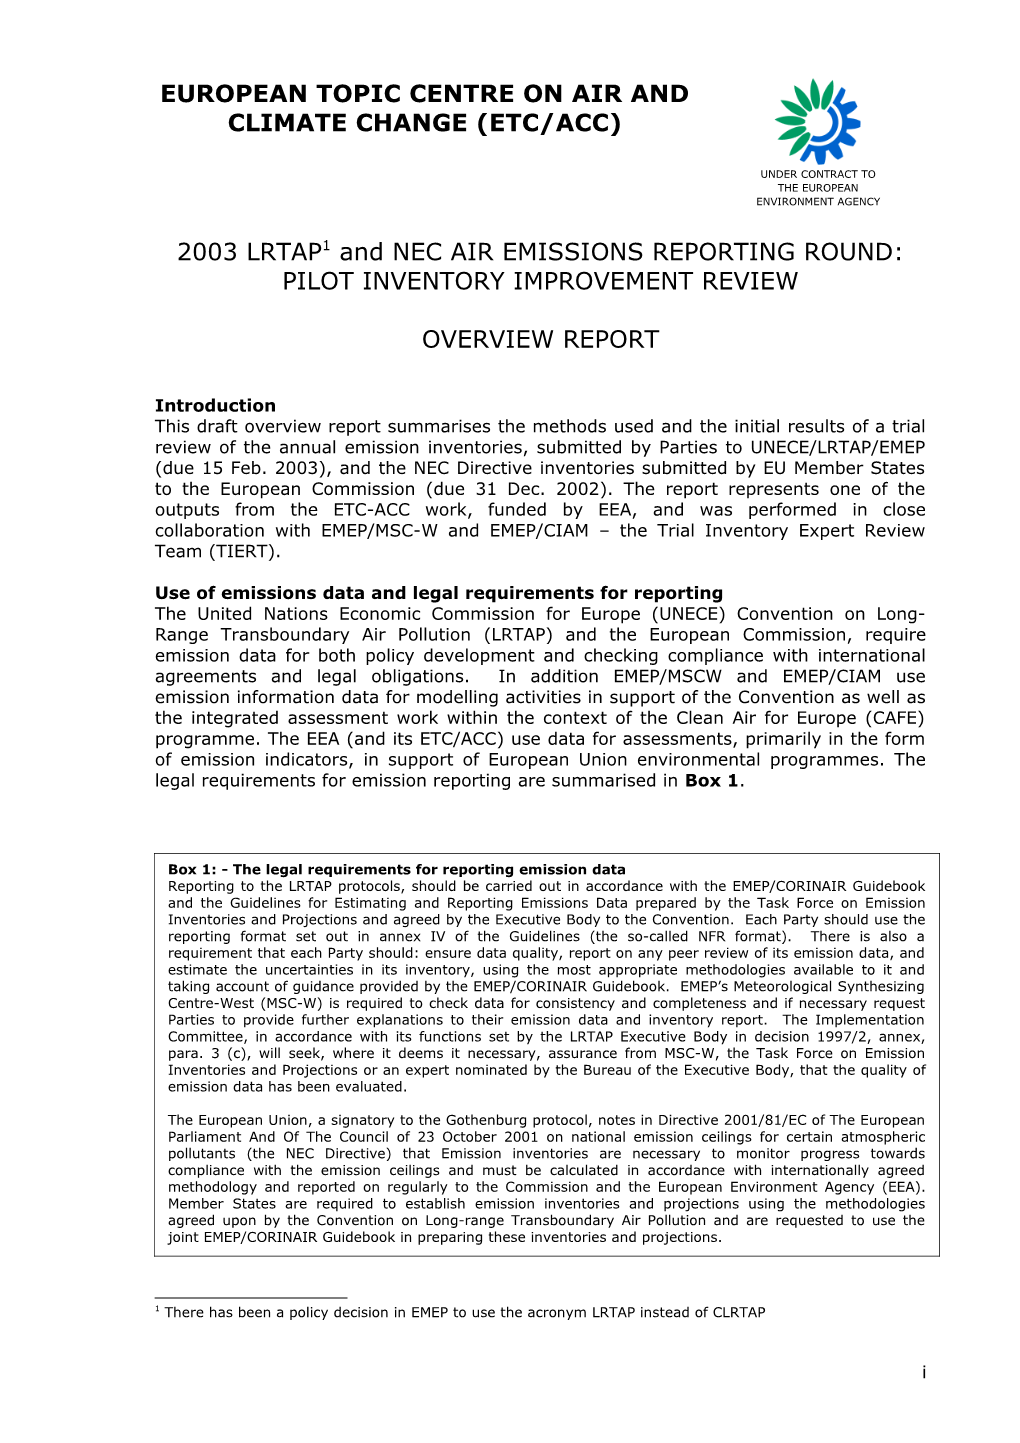 2003 CLRTAP and NEC AIR EMISSIONS INVENTORY TRIAL REVIEW: OVERVIEW REPORT